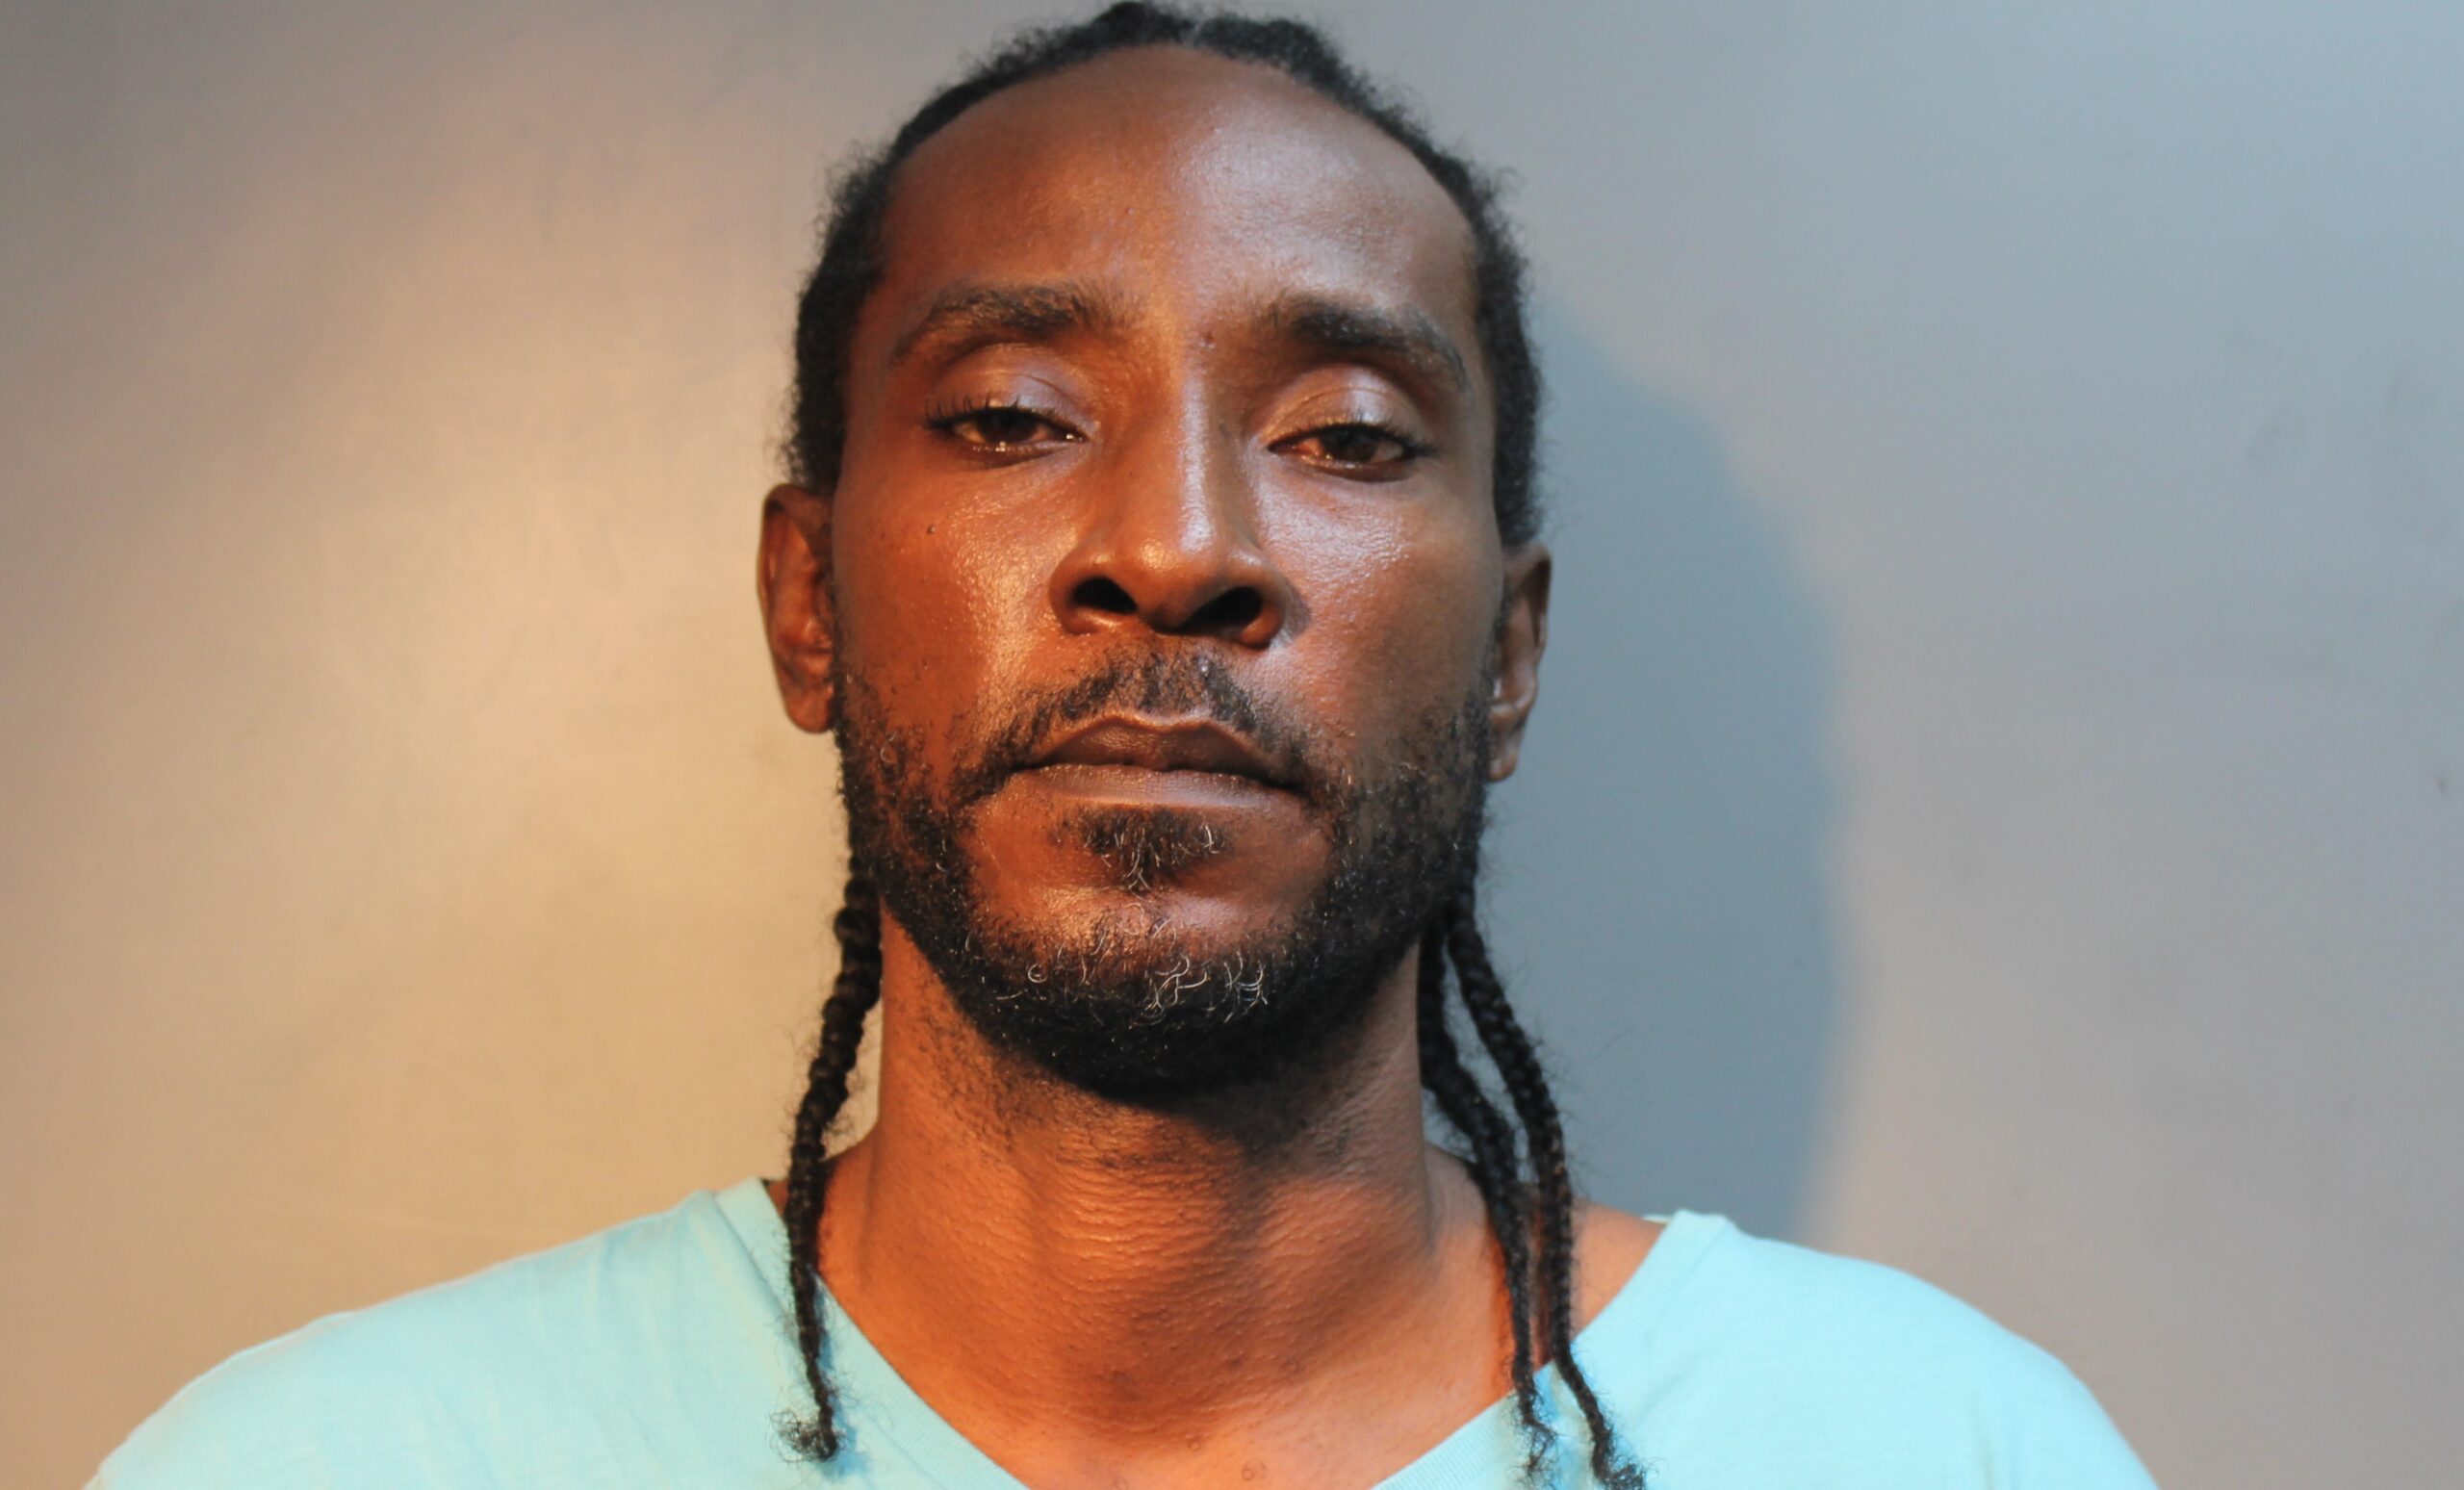 St. Croix Man Wanted For Murder, Surrenders To Police Within 3 Hours Of Arrest Warrant: VIPD